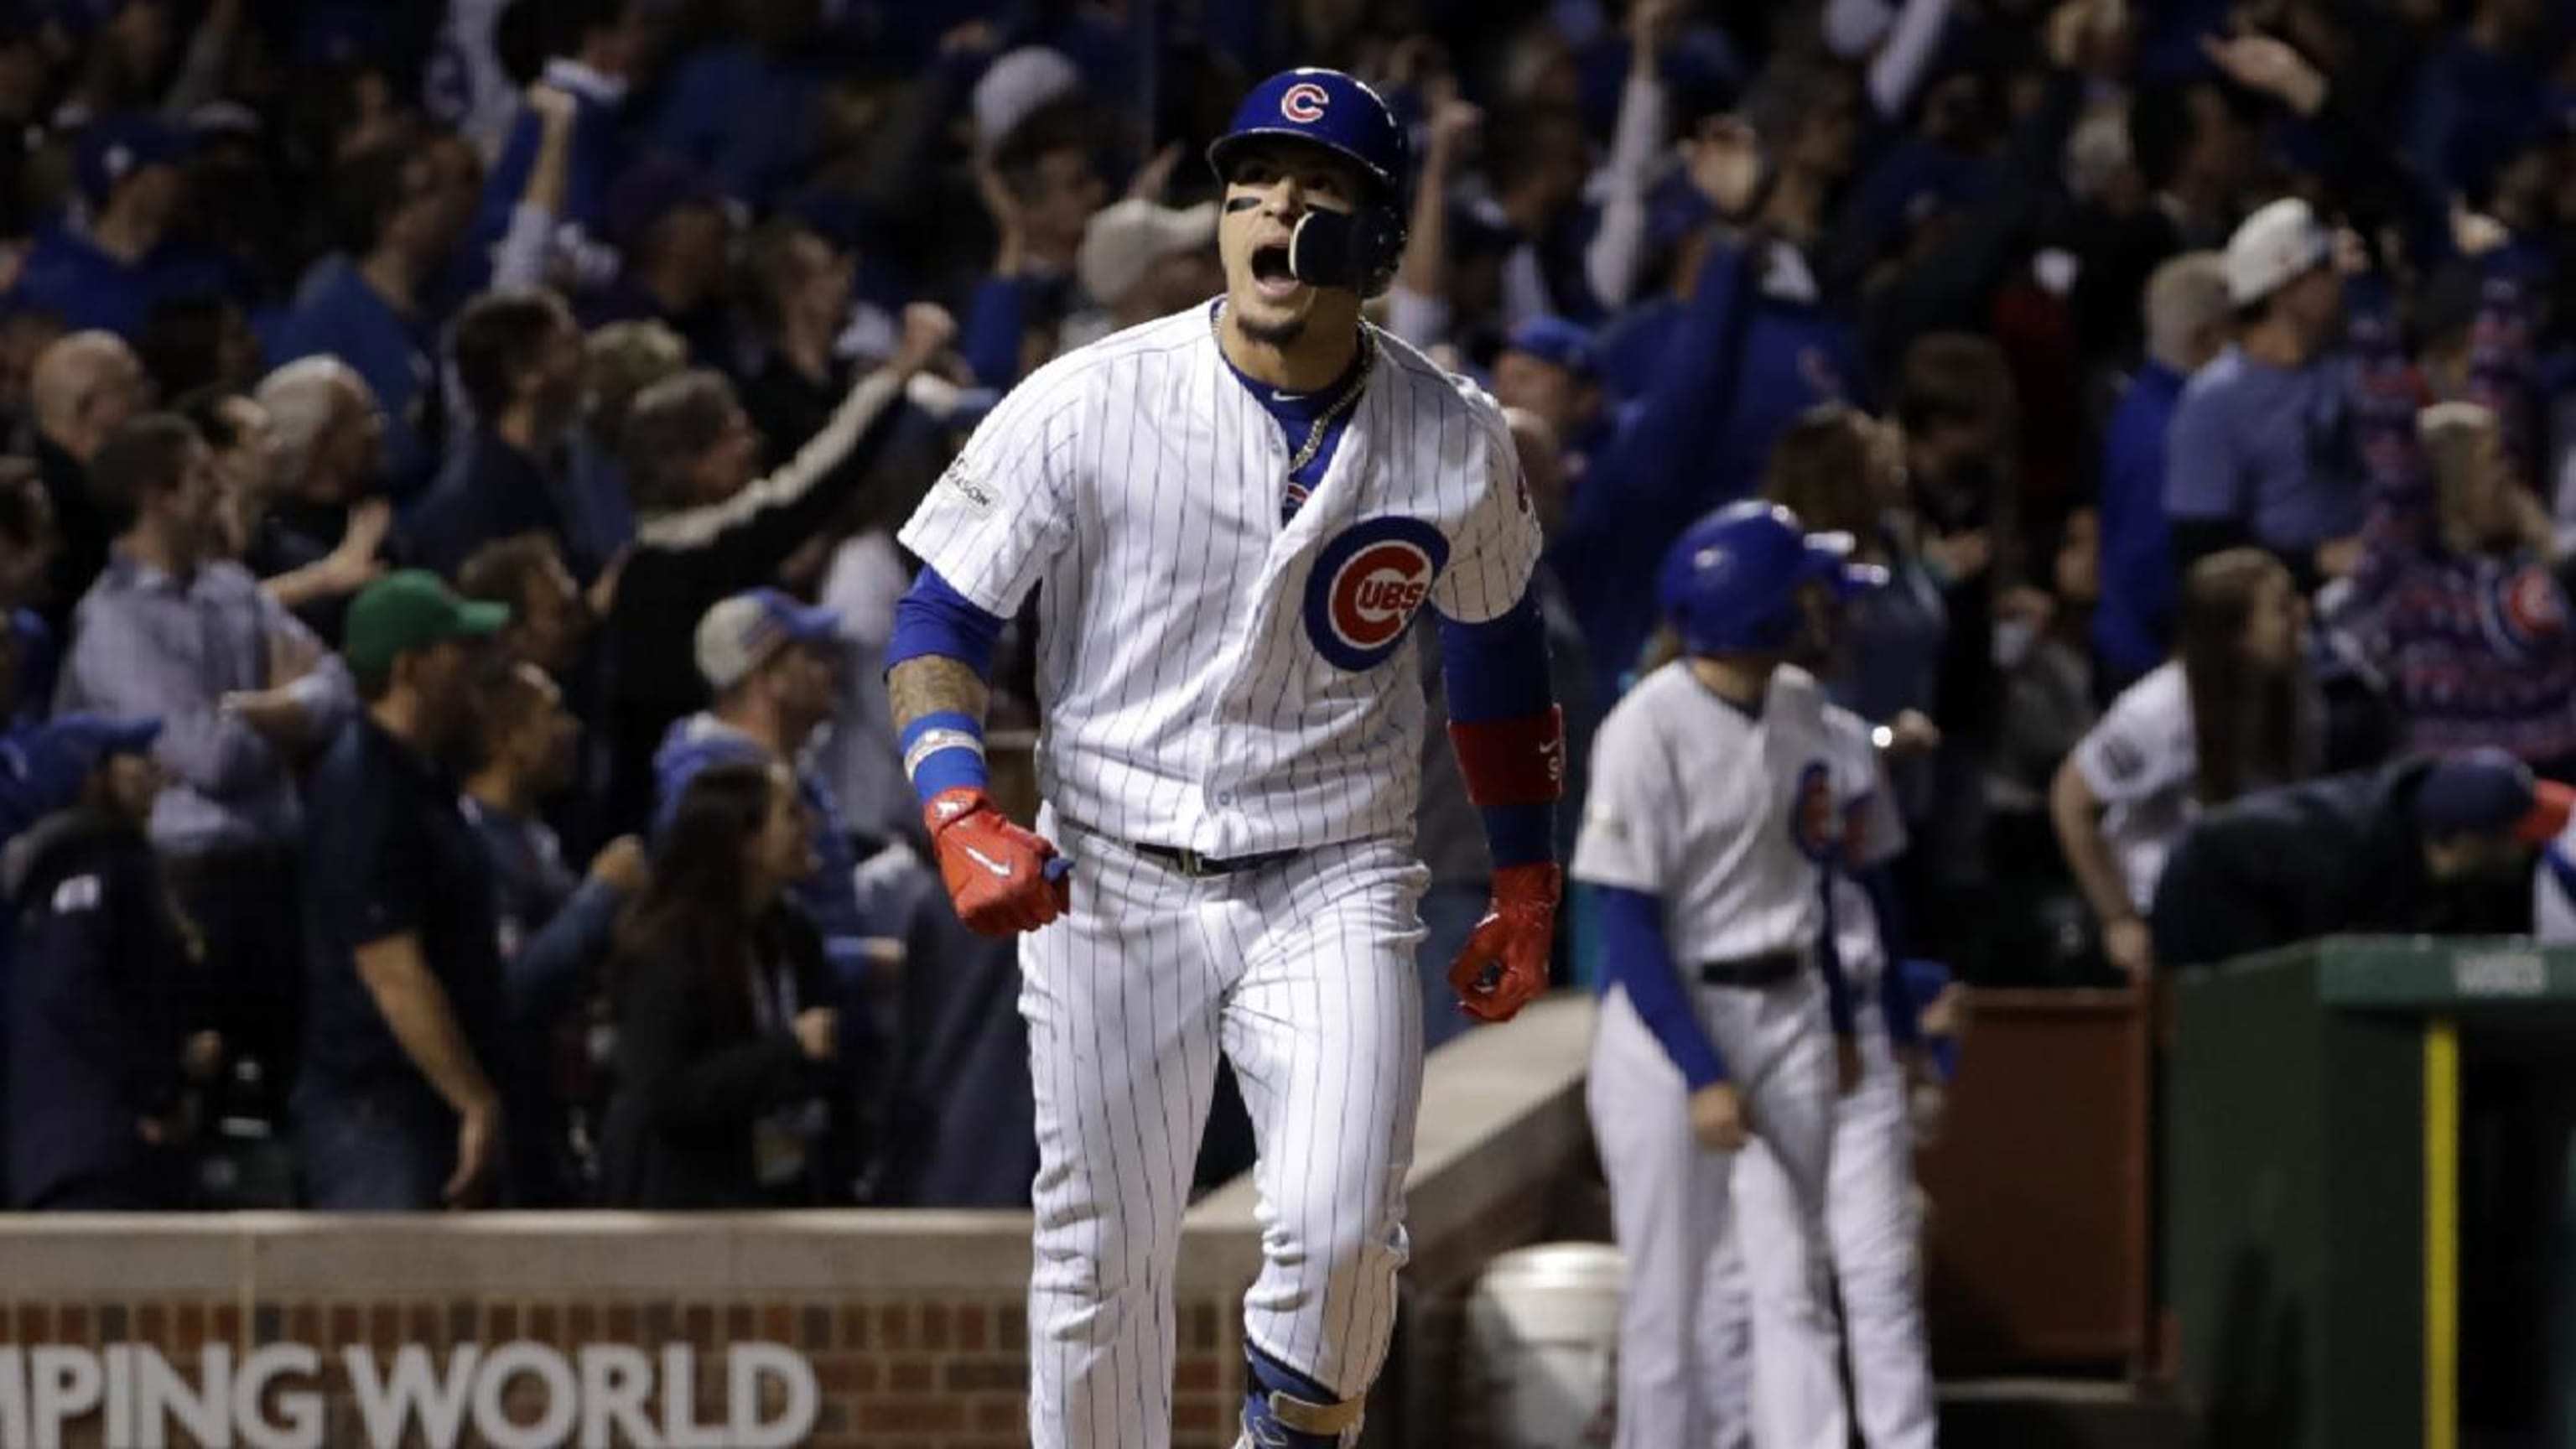 March 20, 2017: Puerto Rico infielder Javier Baez #9 yells for a